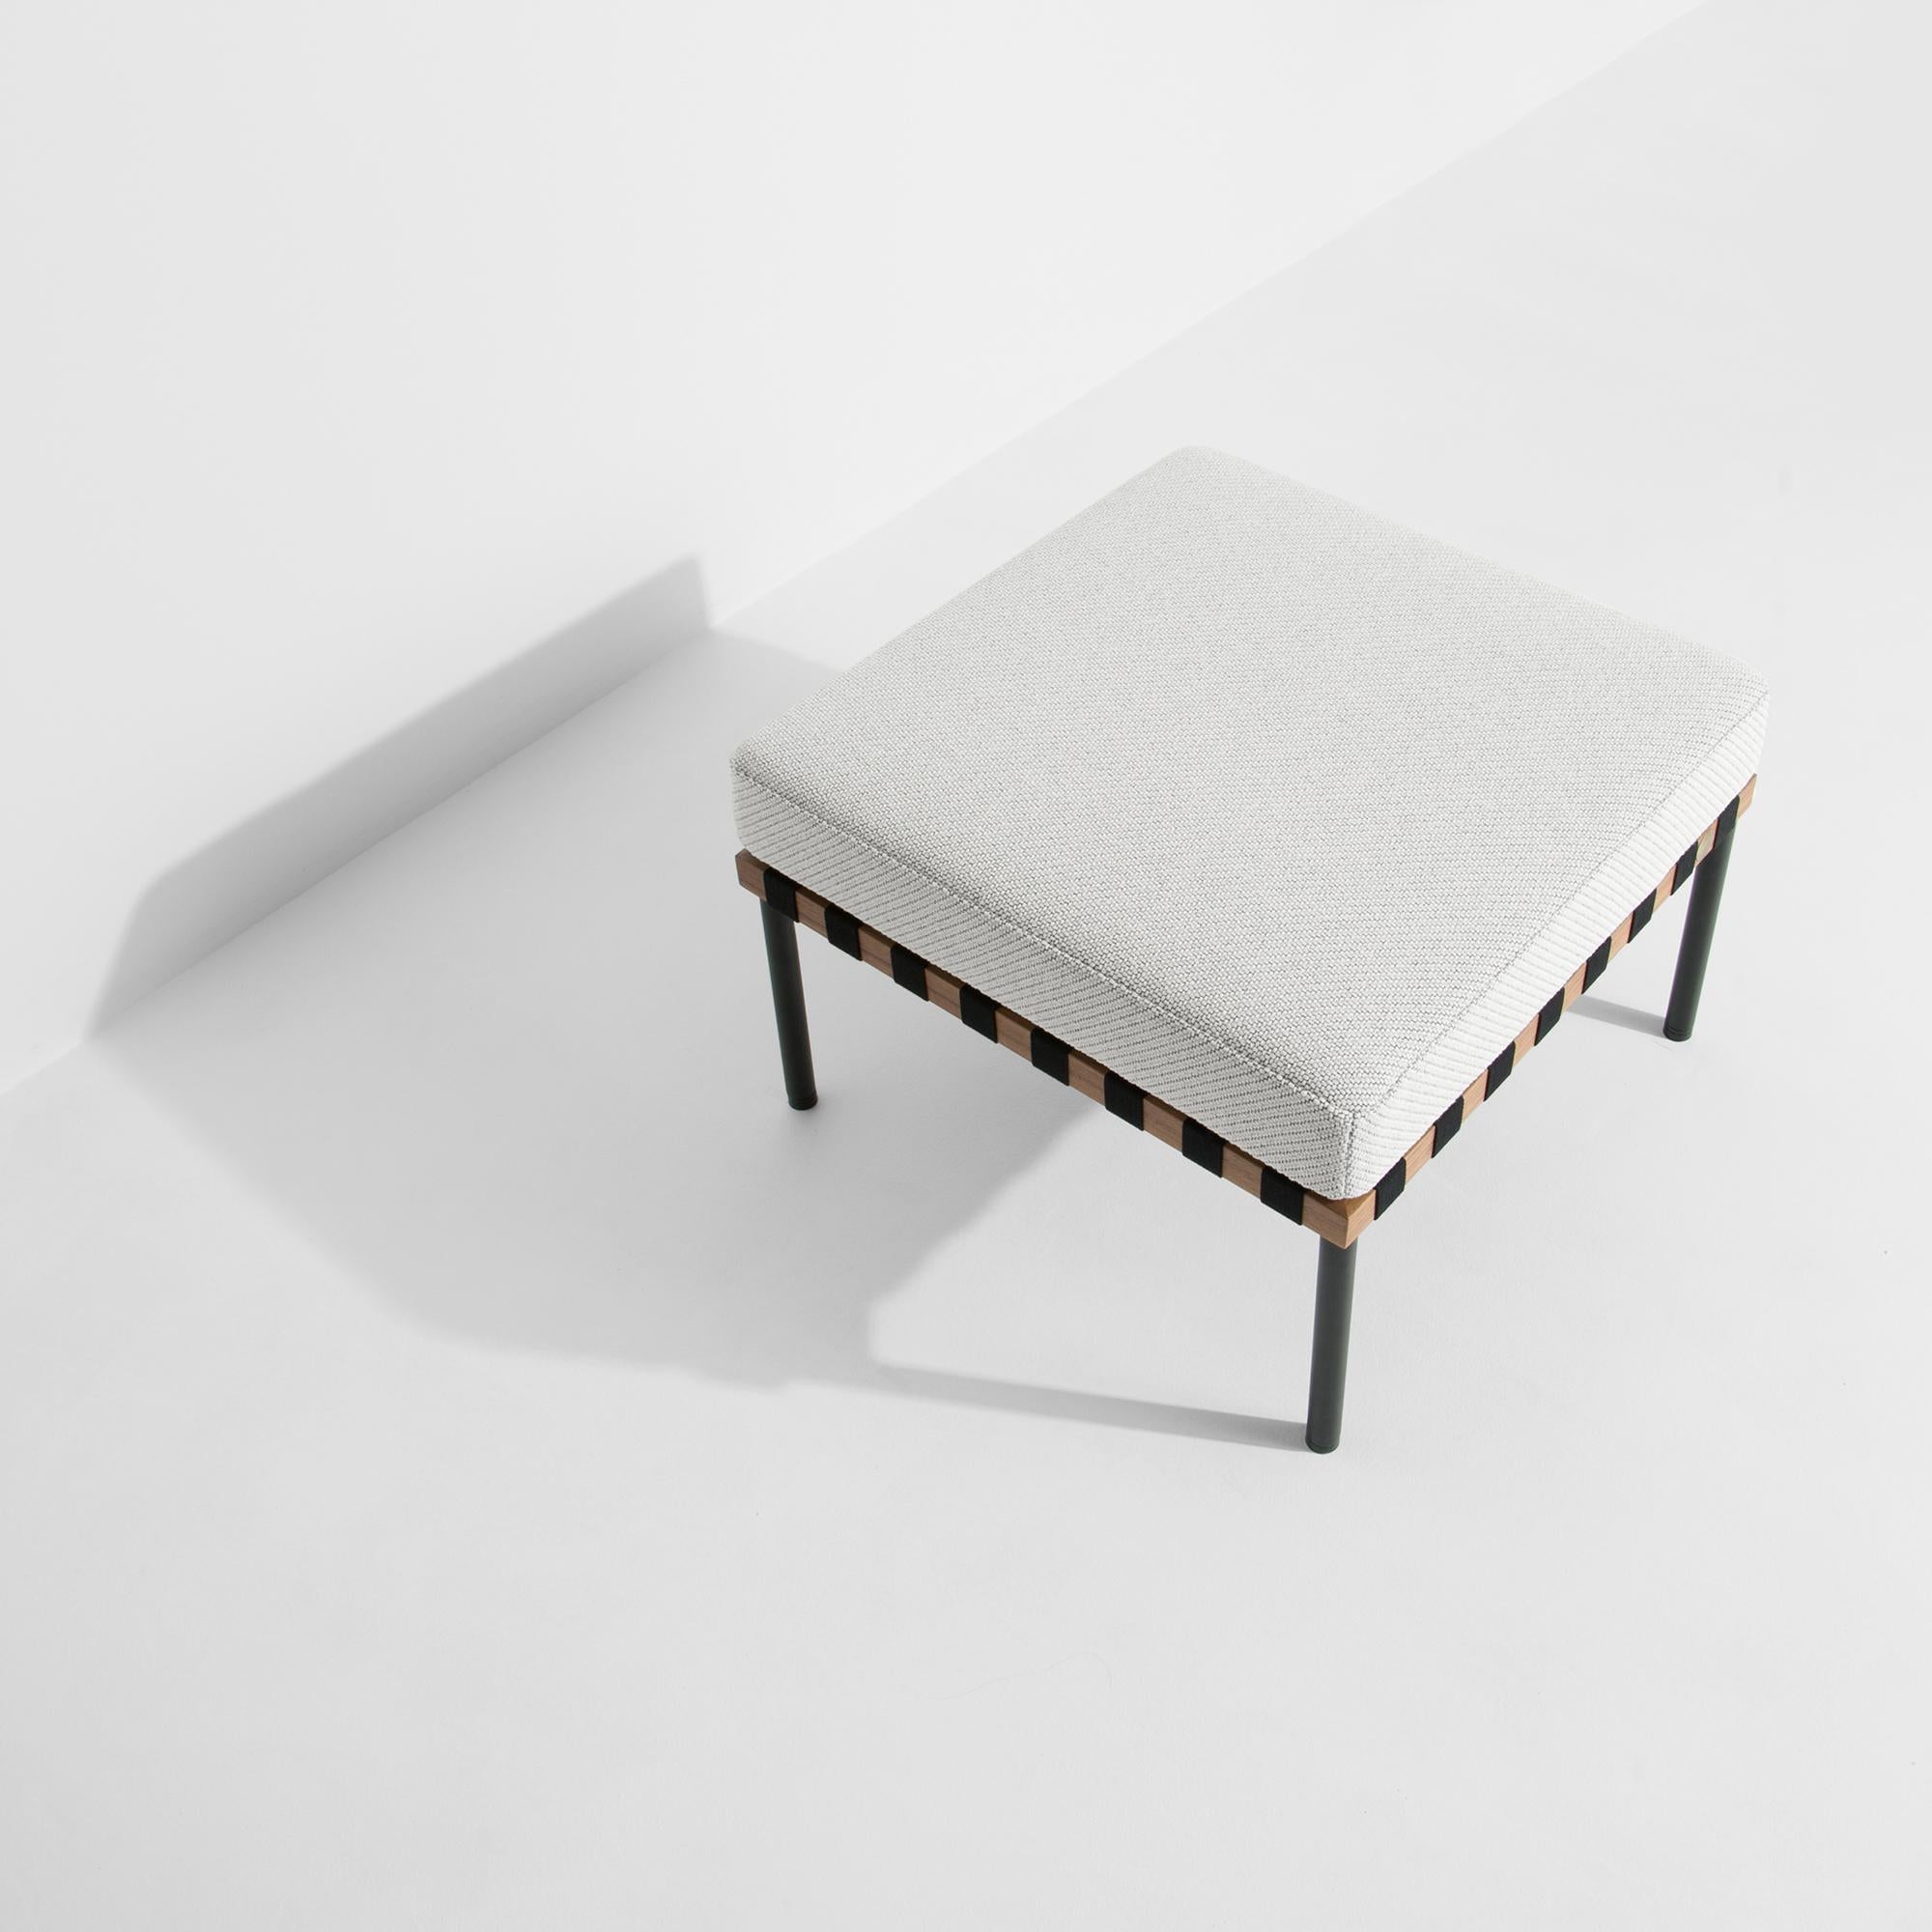 Petite Friture Grid Stool in White with Walnut by Studio Pool, 2015

Pool designed the Grid collection in reference to the Bauhaus style and in honour of the graphic talents. Each element of this all-modular system retains the identity of the